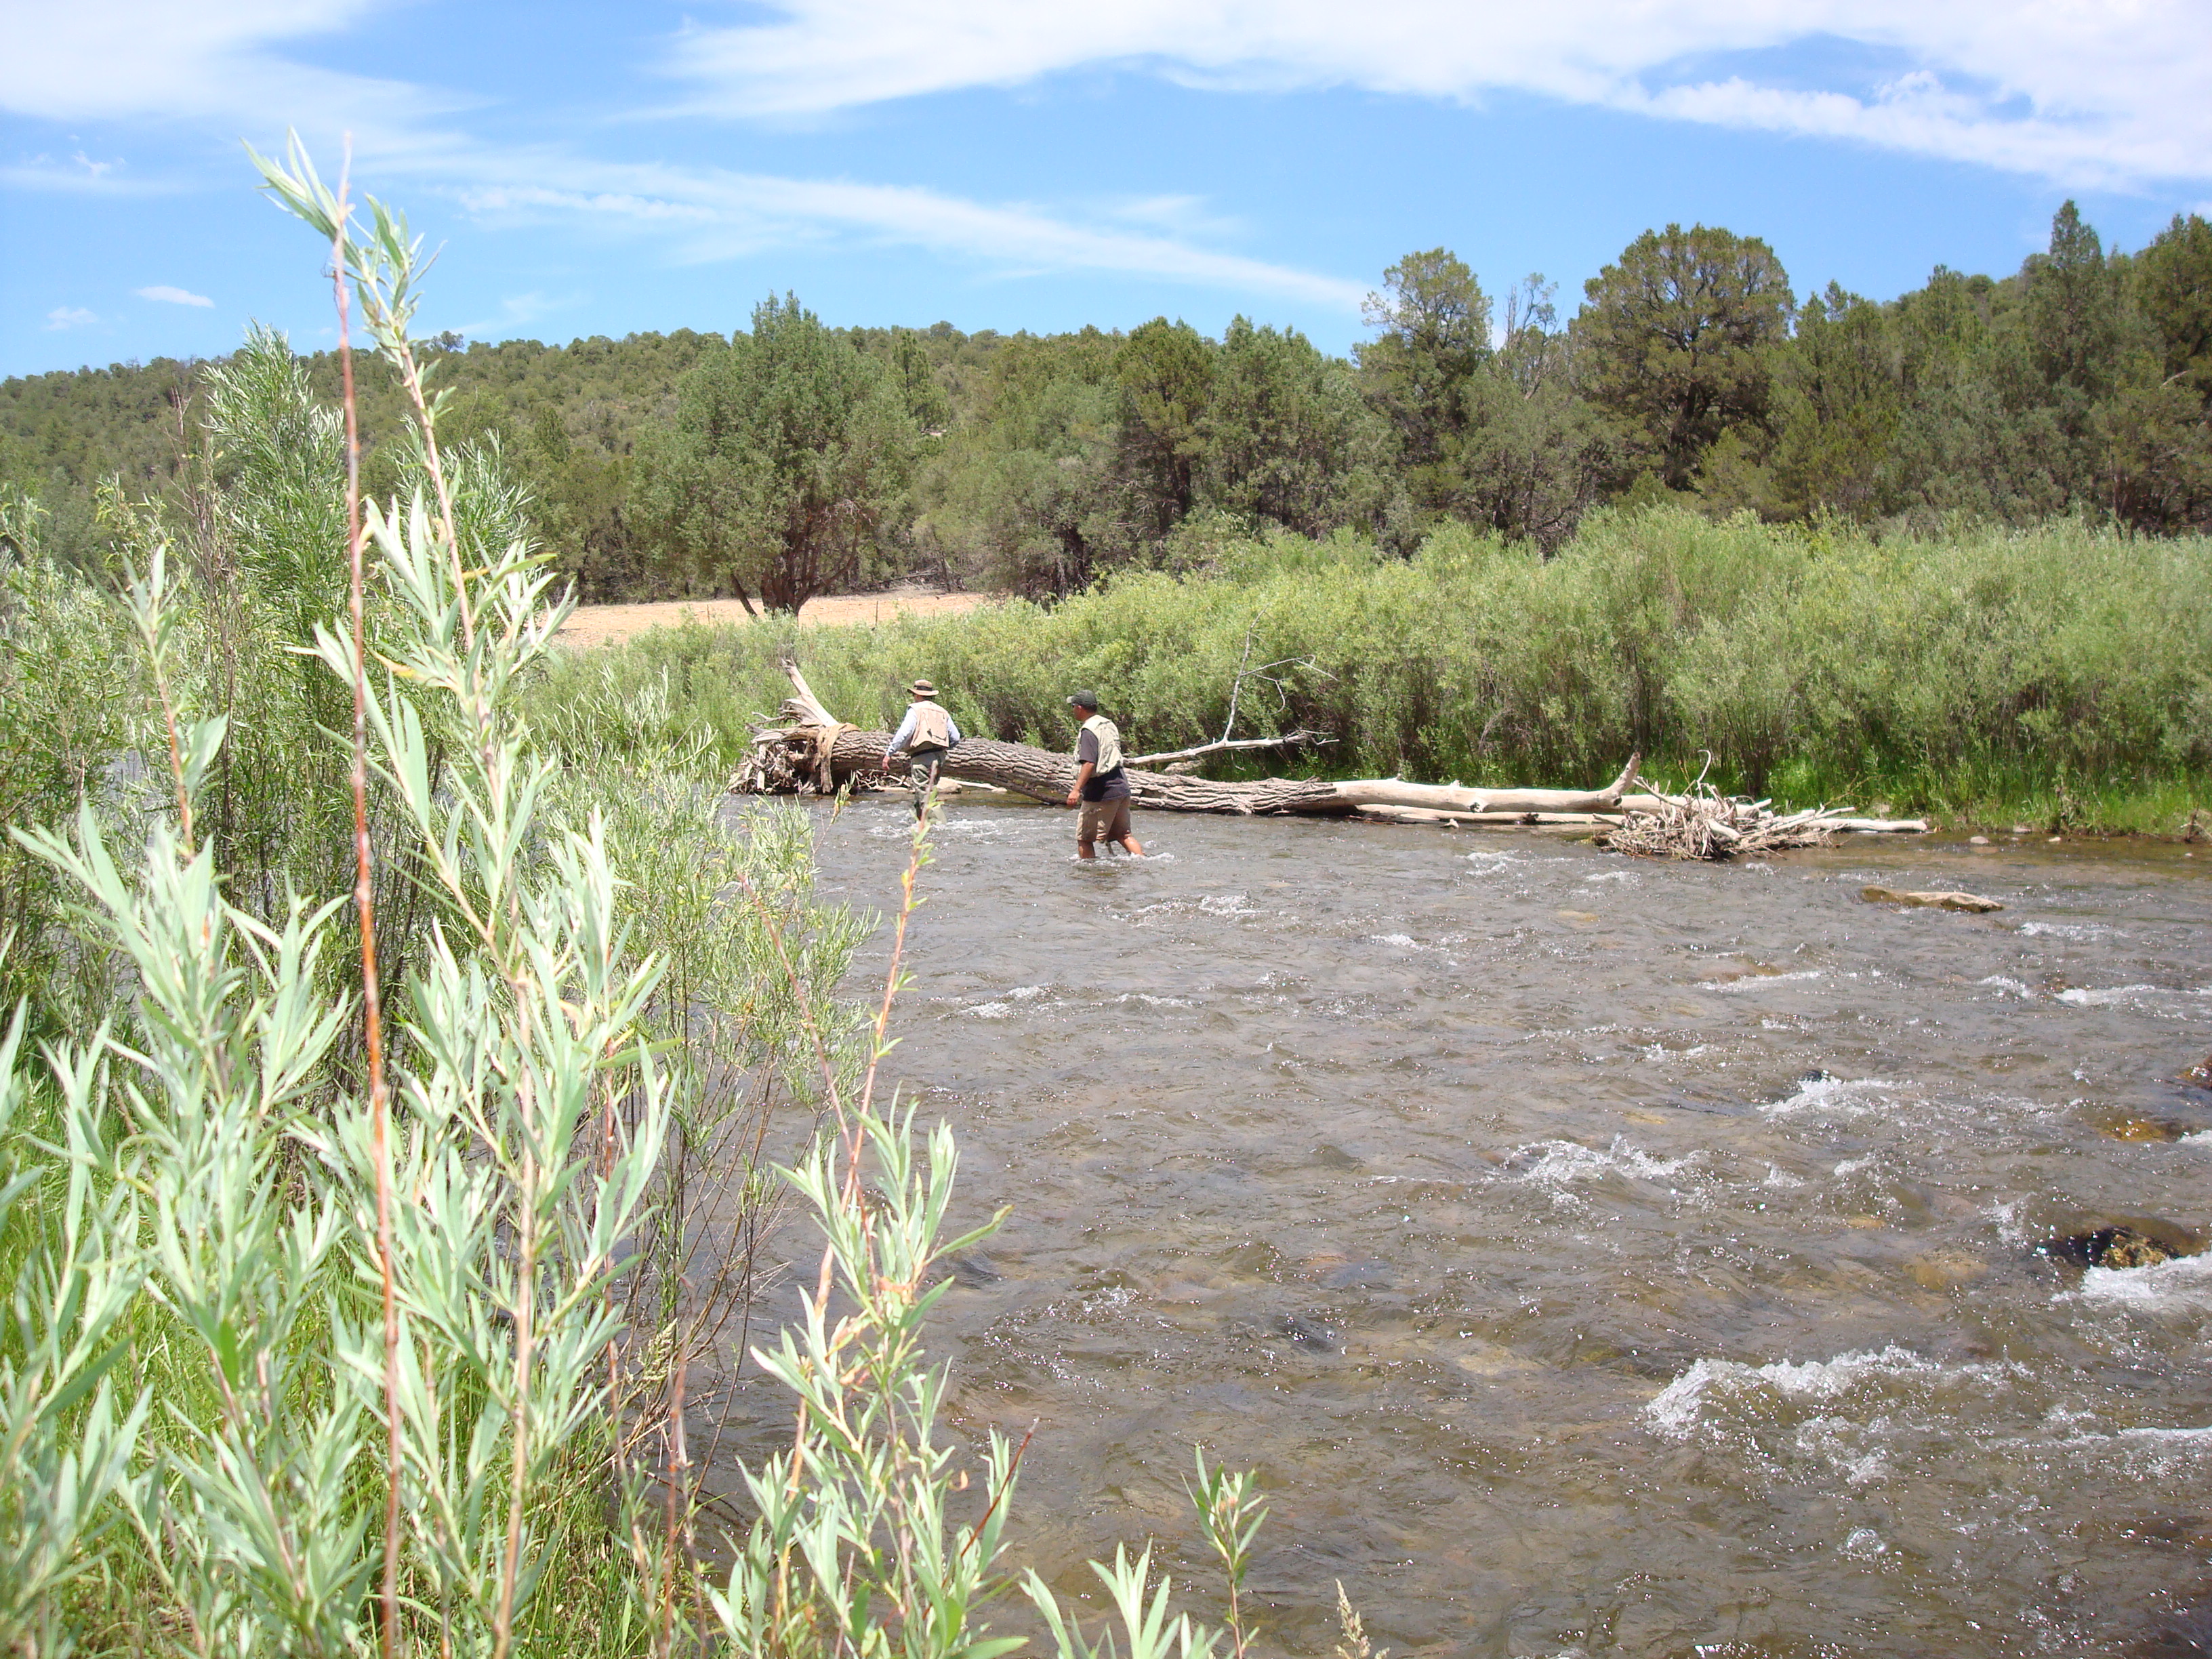 A man wading in a river fishing with trees in the background.